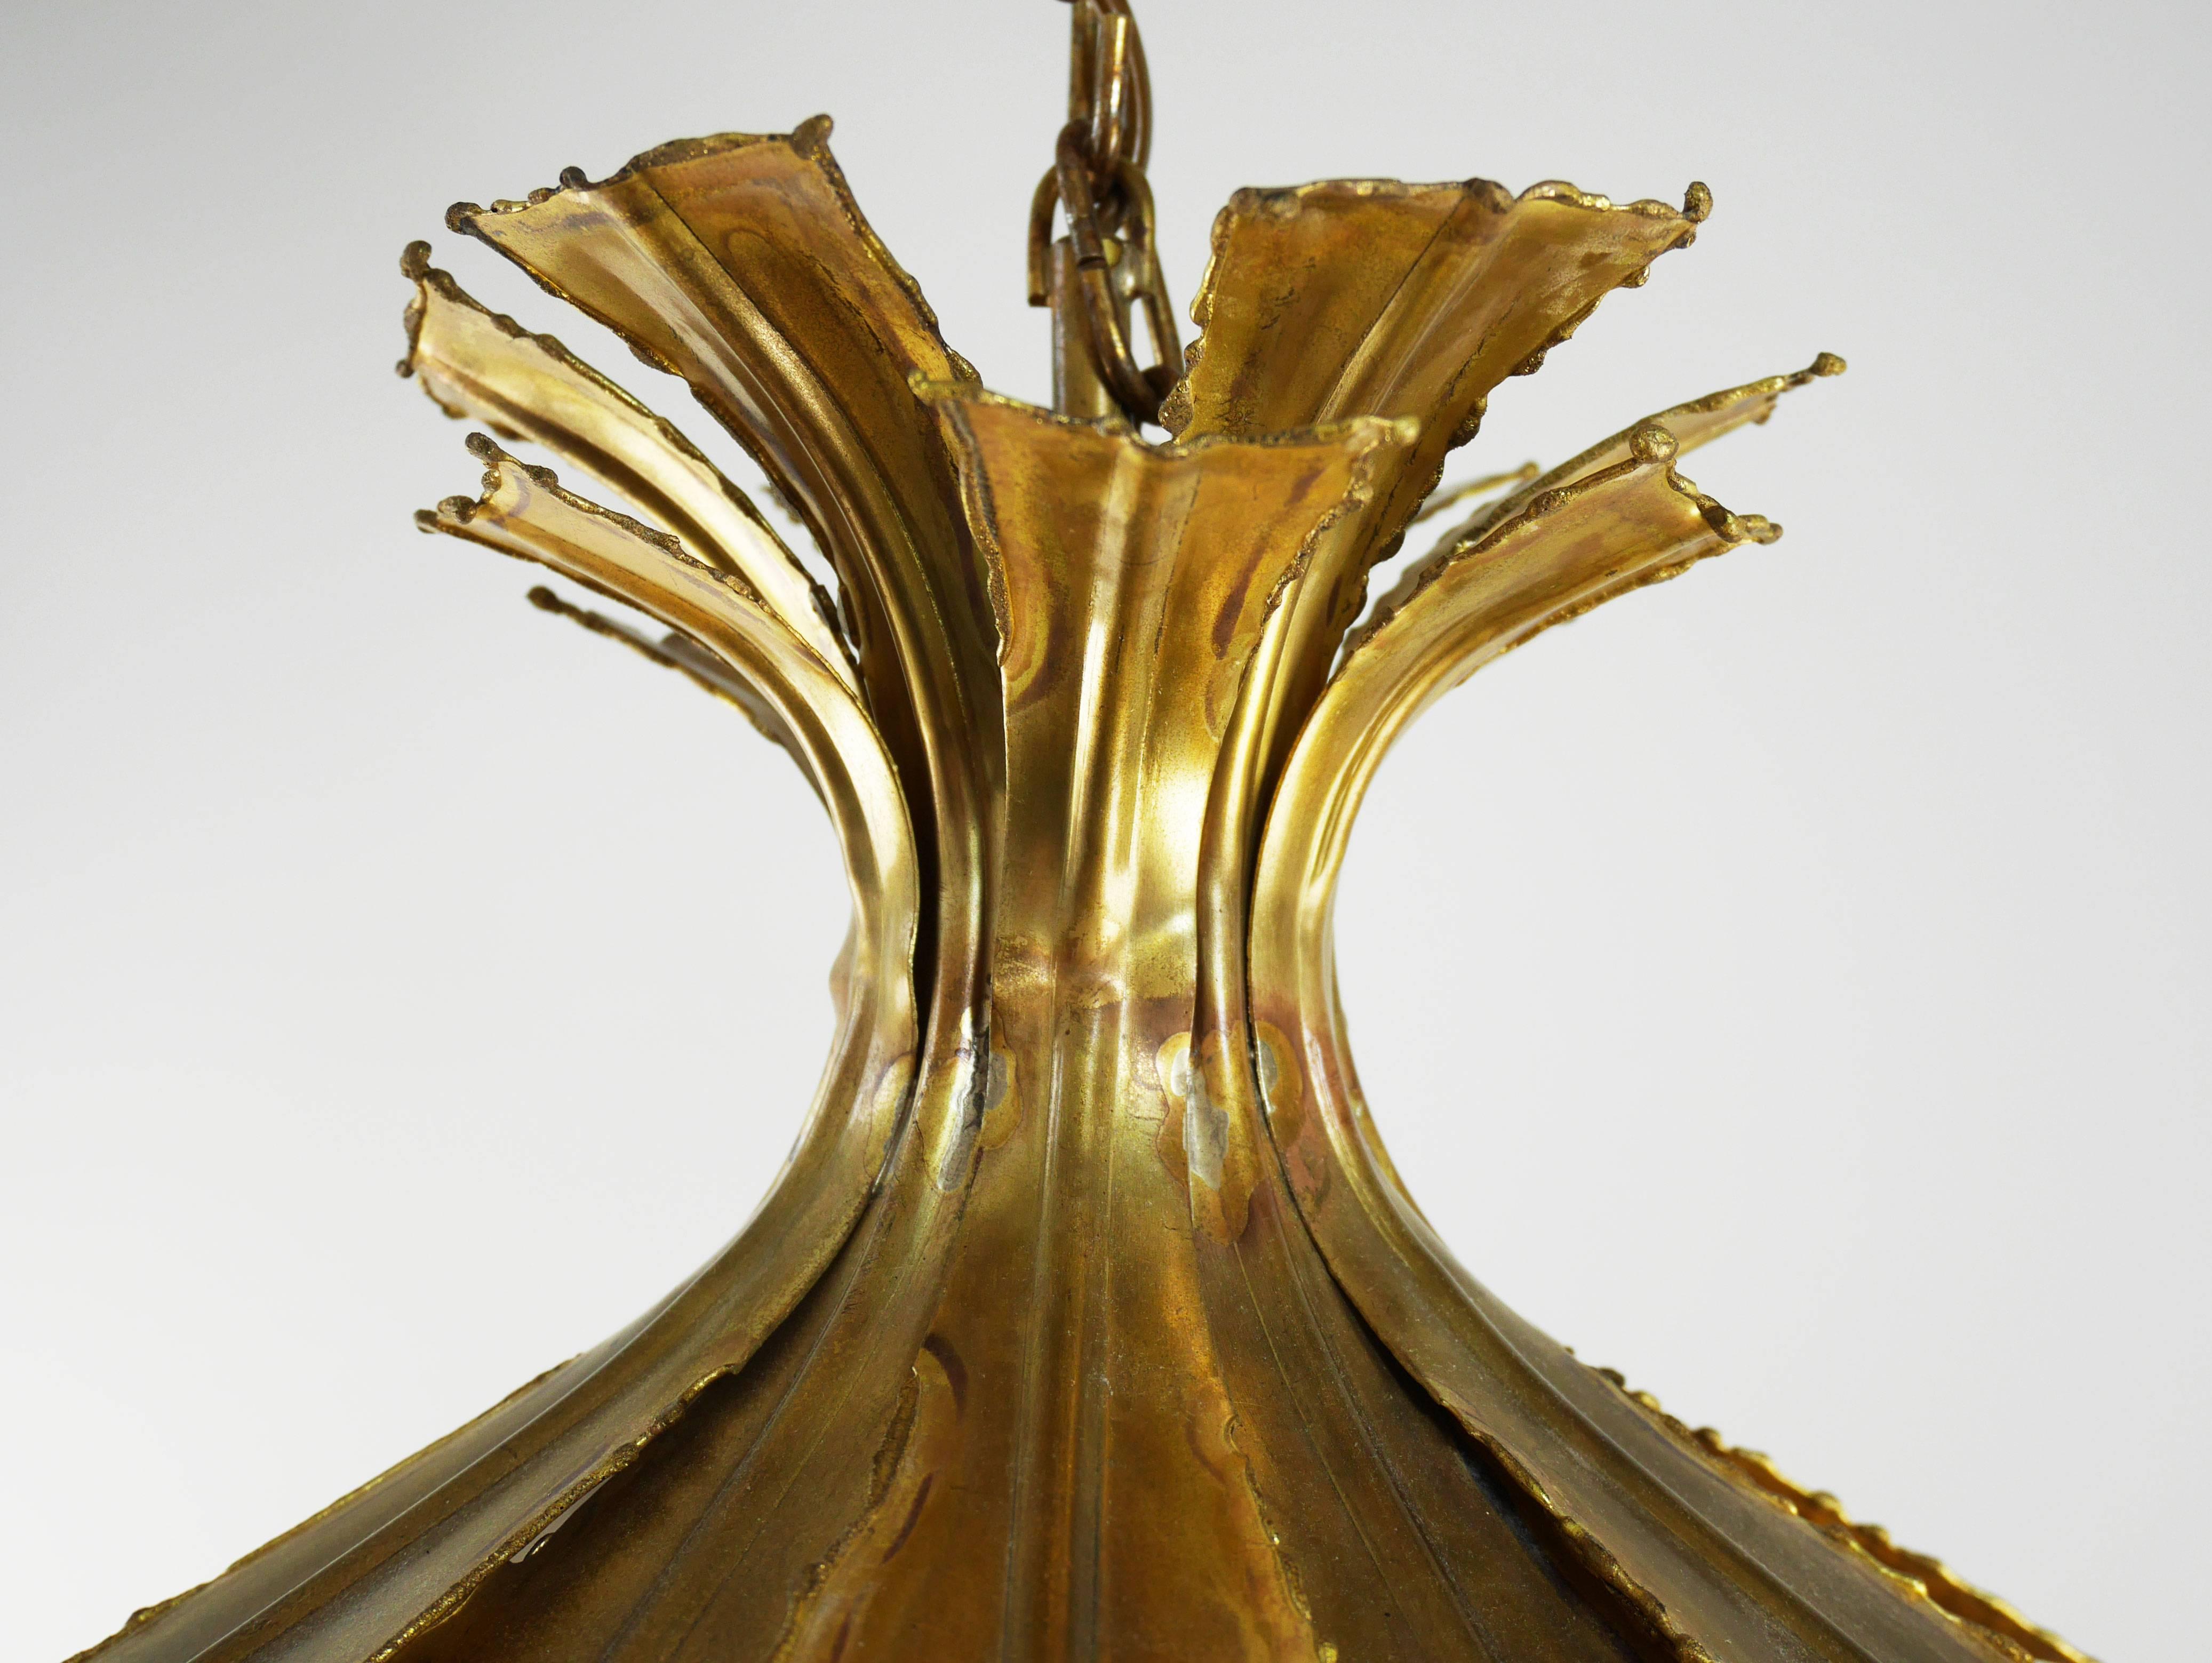 Large standout piece by the versatile Danish designer Svend Aage Holm Sorensen. Danish Modern Brutalist patinated brass pendant named The Onion. The brass petals are torch cut and acid treated for effect - Holm Sorensen's signature method. The piece